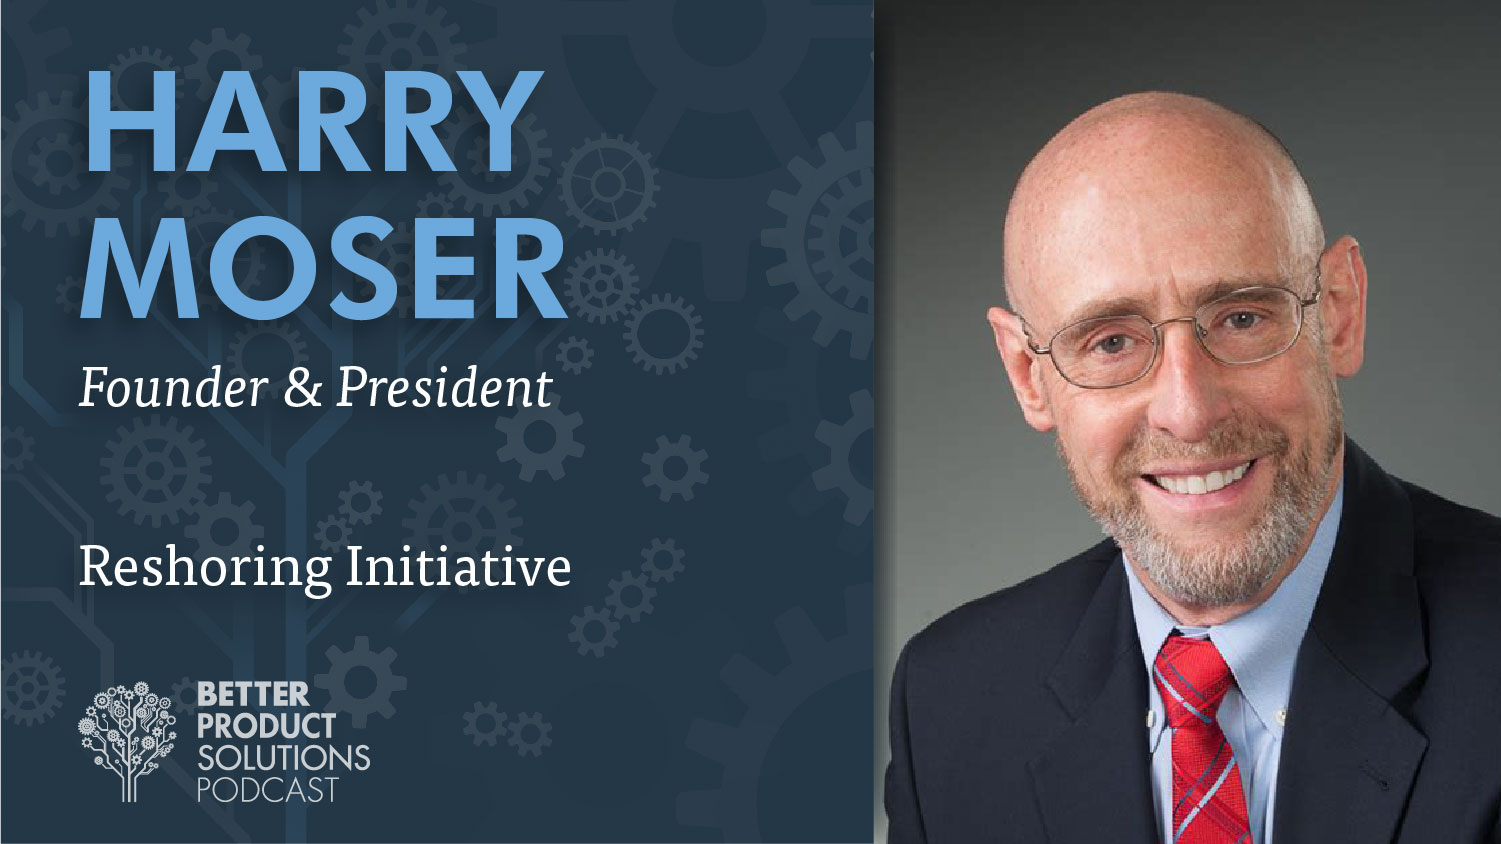 Podcast: Harry Moser, Founder & President of The Reshoring Initiative